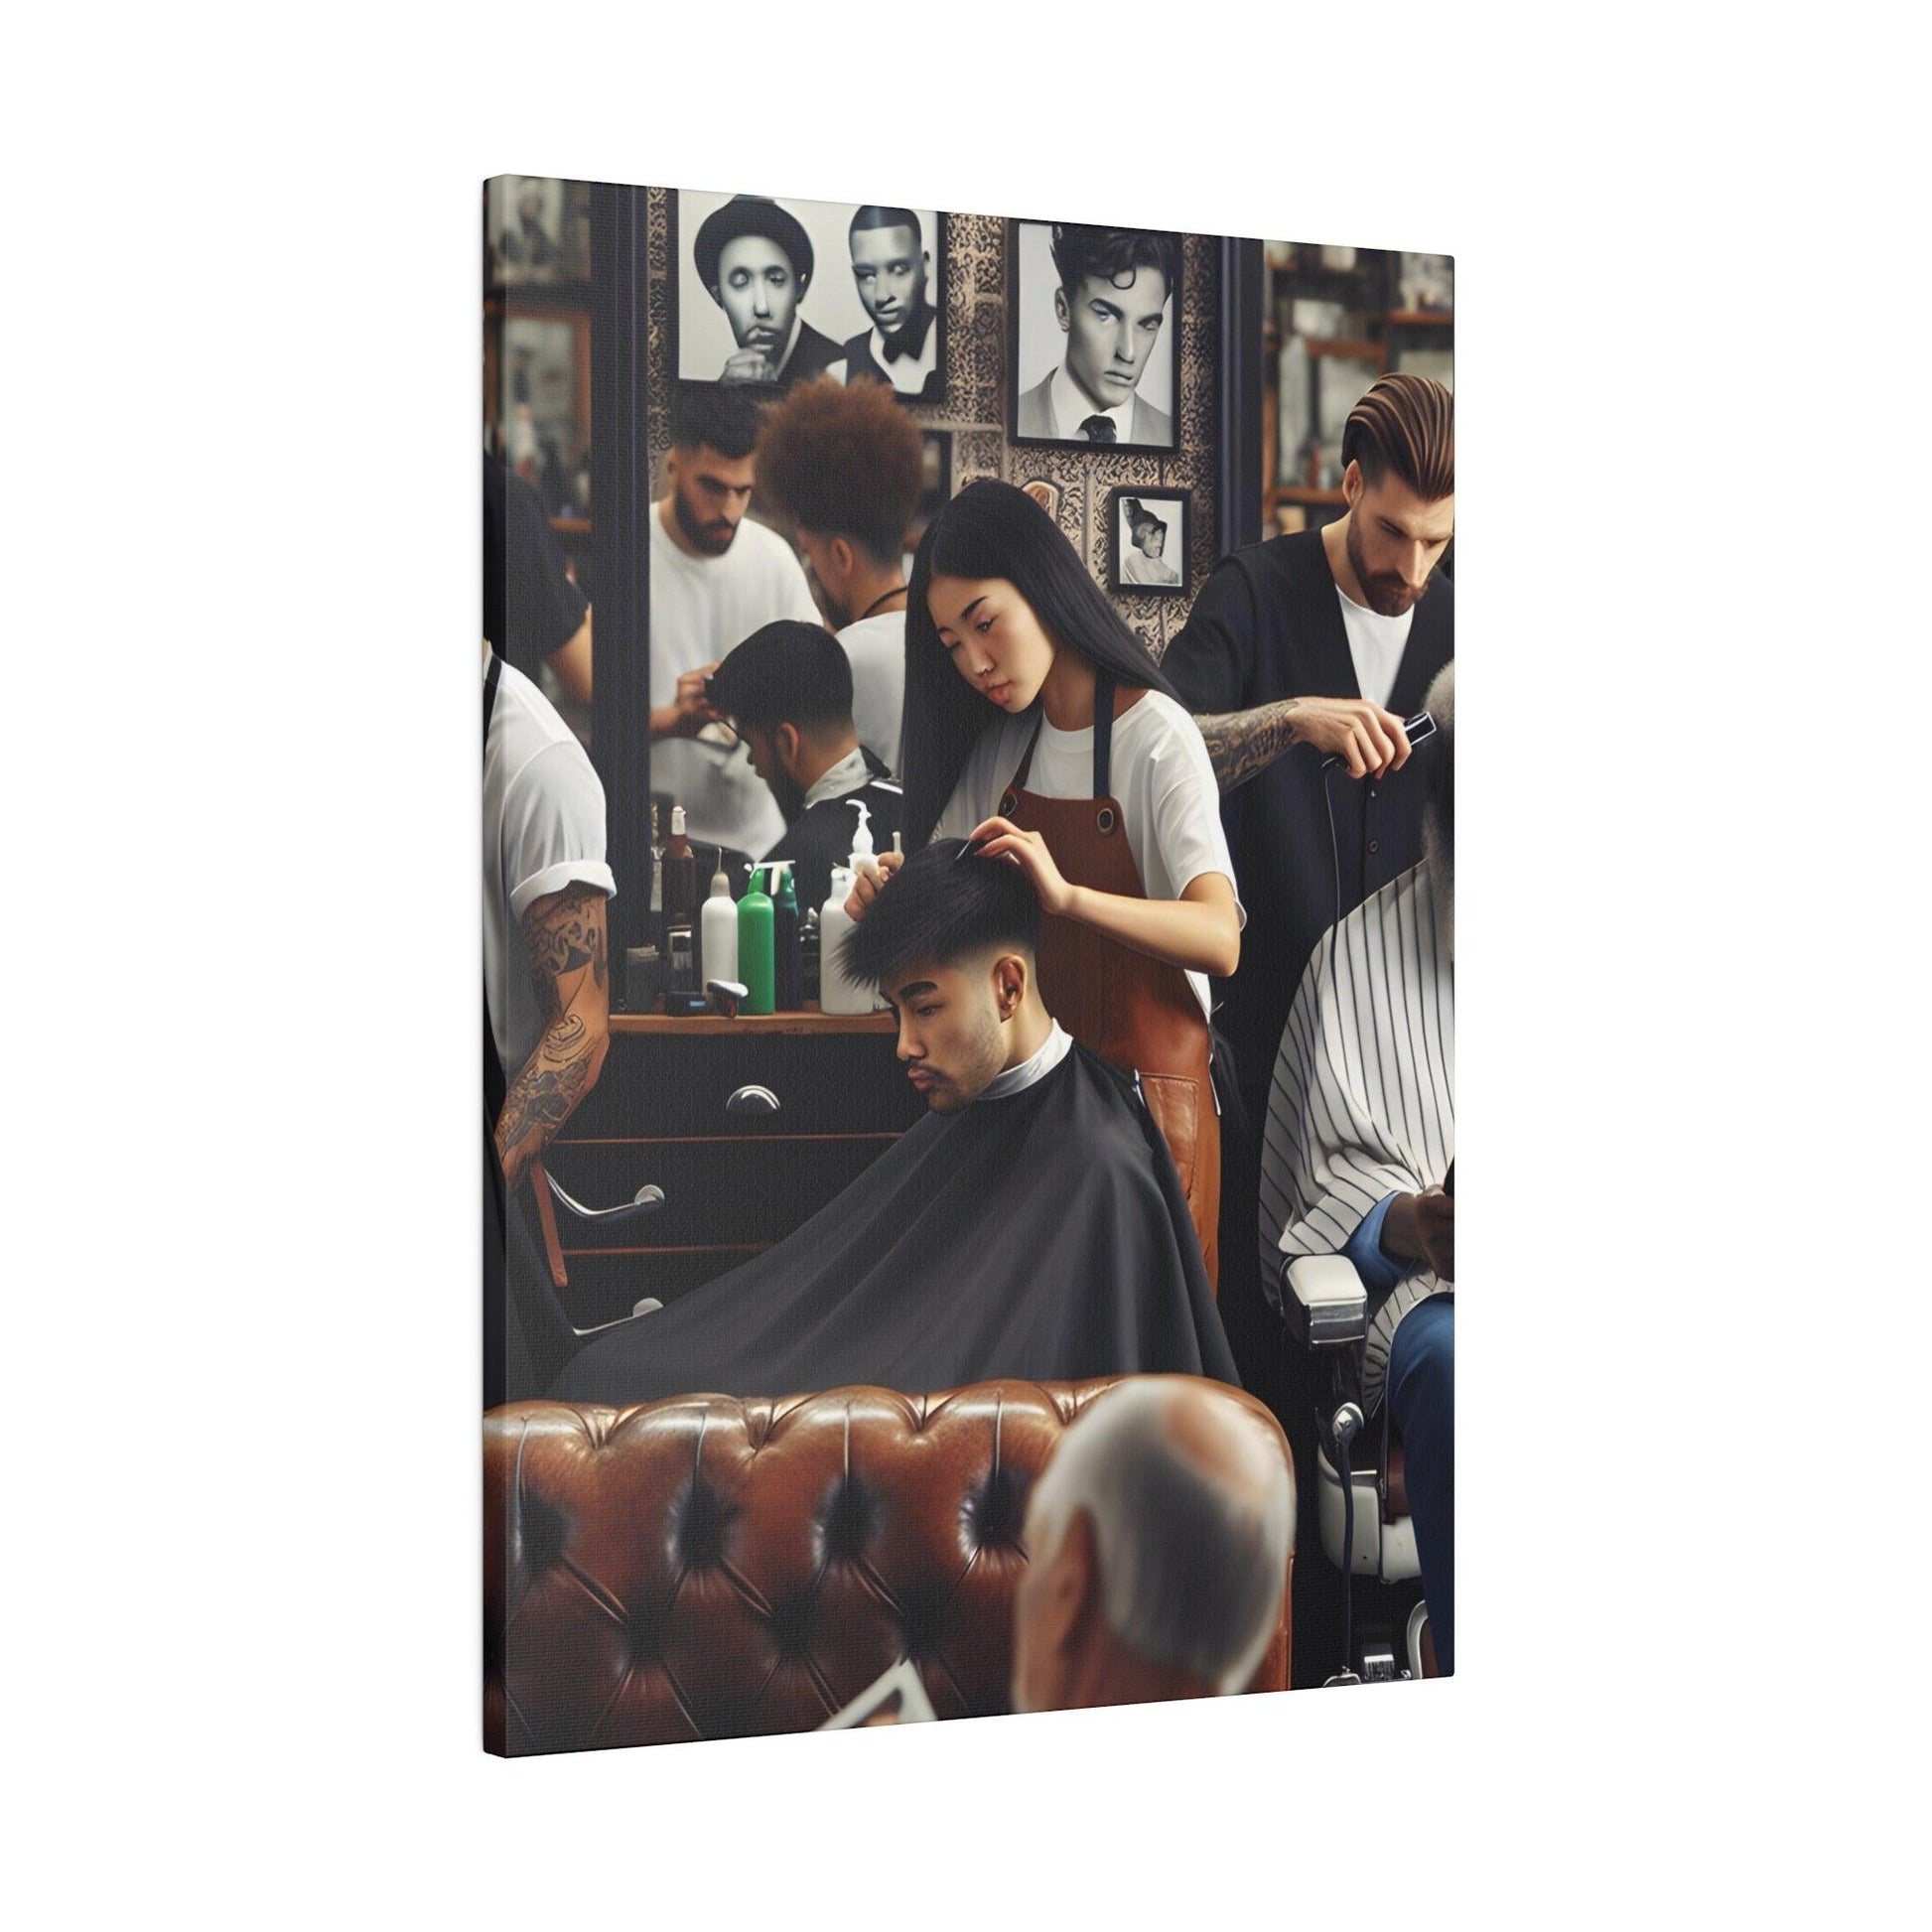 "Clip & Shear Chronicles: Barber Shop Canvas Chronicles" - The Alice Gallery